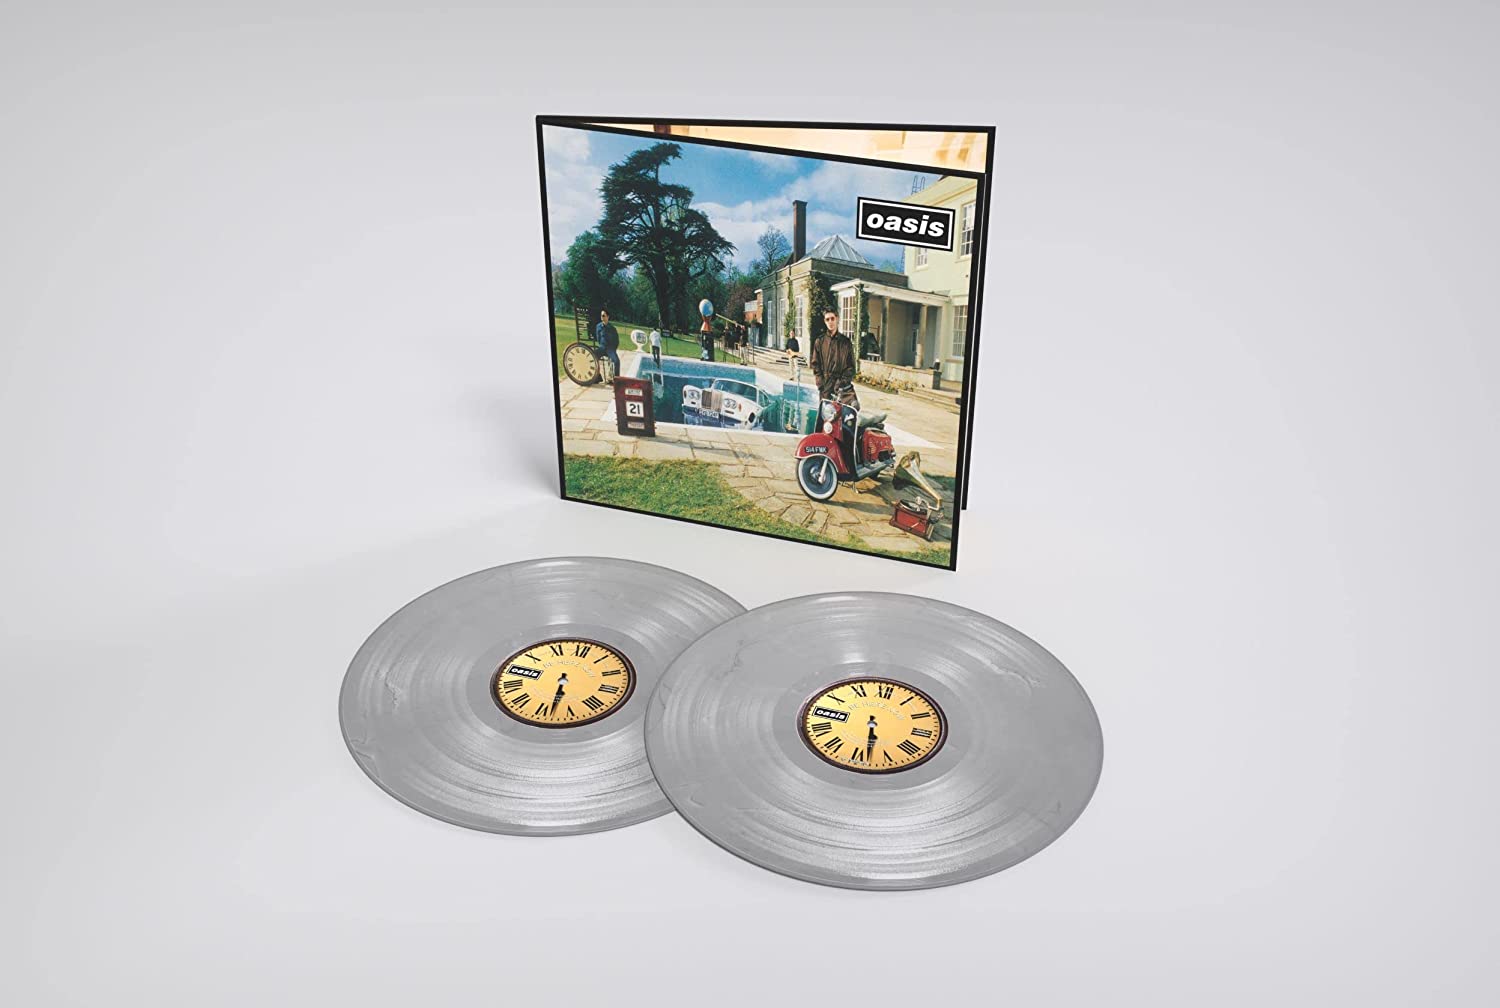 Oasis / Be Here Now 25th anniversary 2LP set – SuperDeluxeEdition